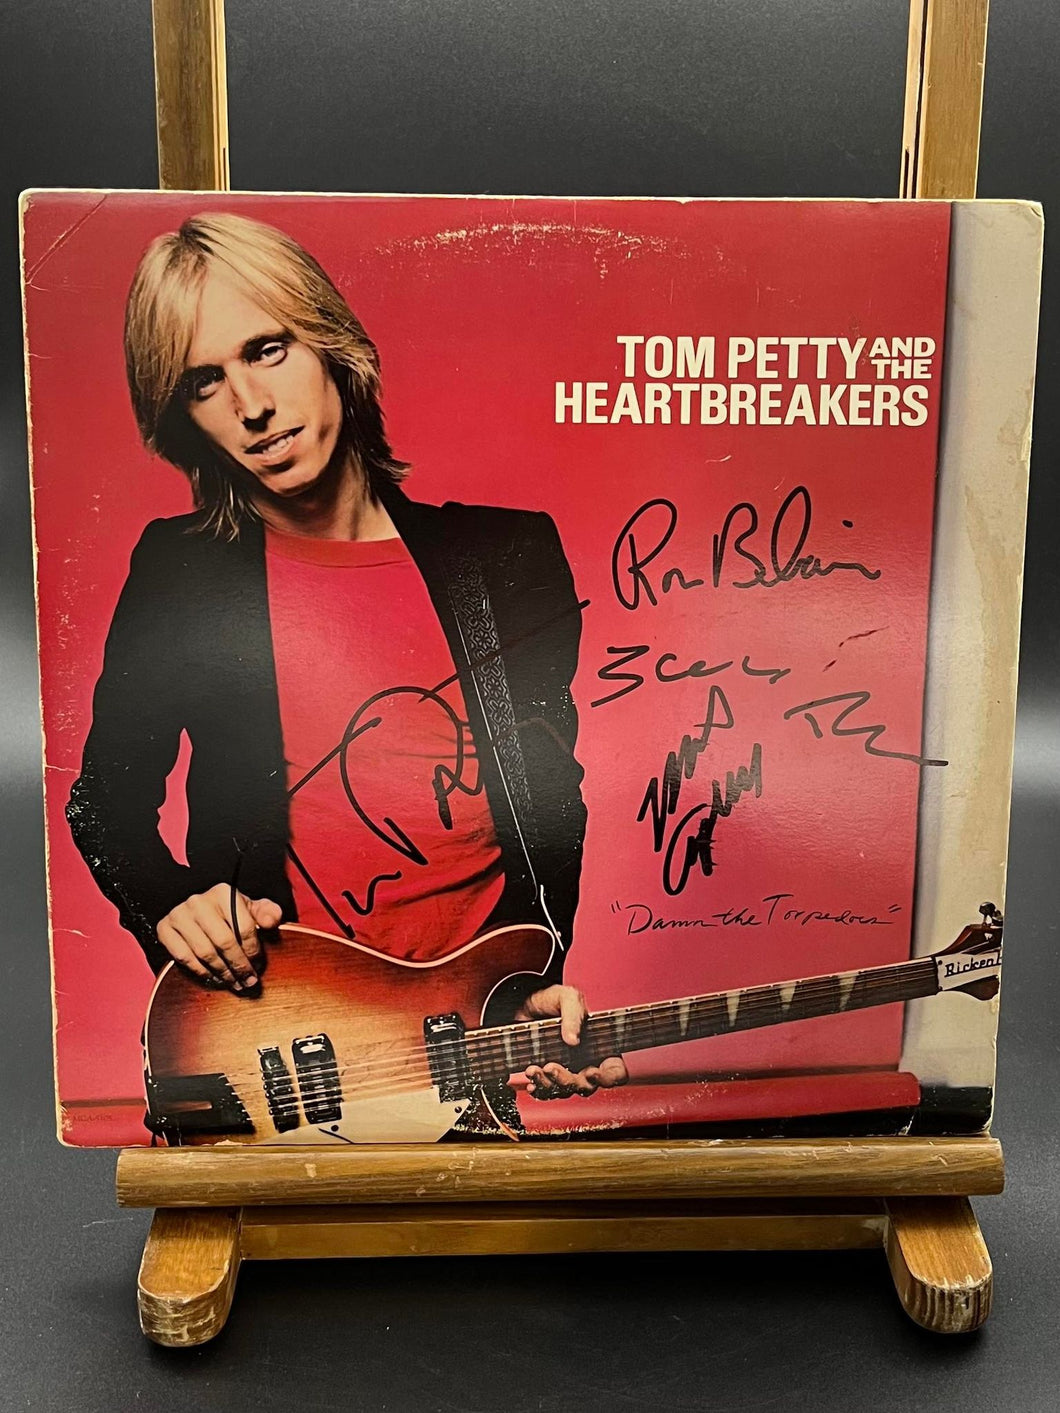 Tom Petty and the Heartbreakers Vinyl Personally Signed by 4 Band Members